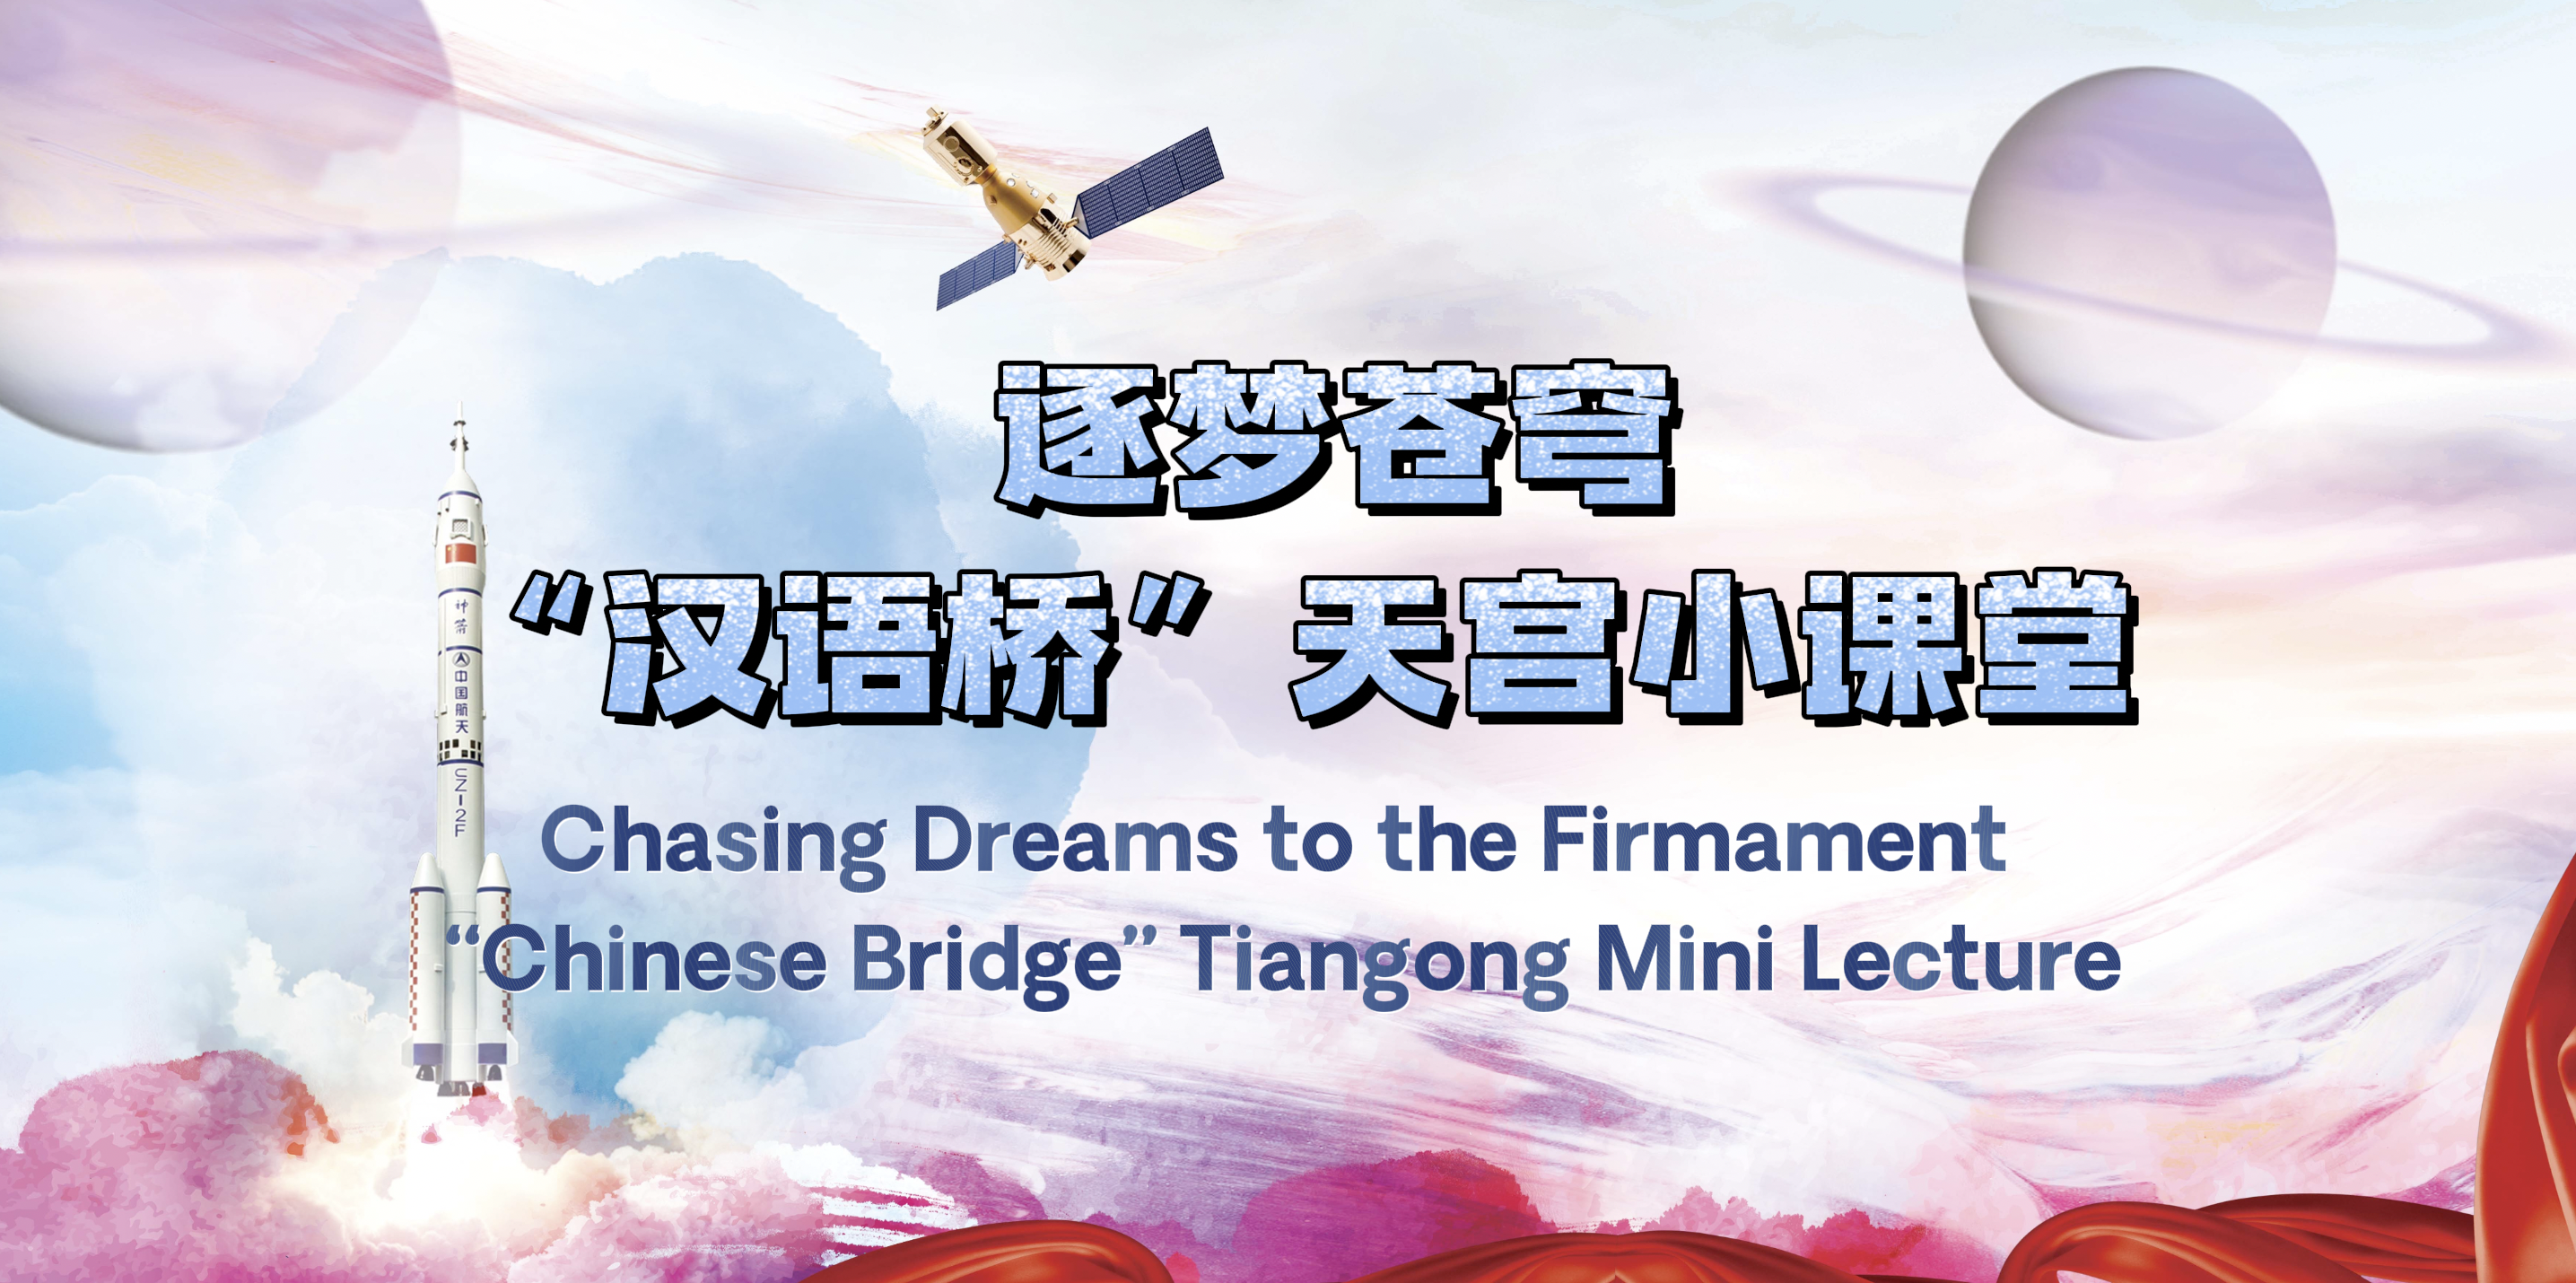 Chasing Dreams to the Firmament “Chinese Bridge” Tiangong Mini Lecture